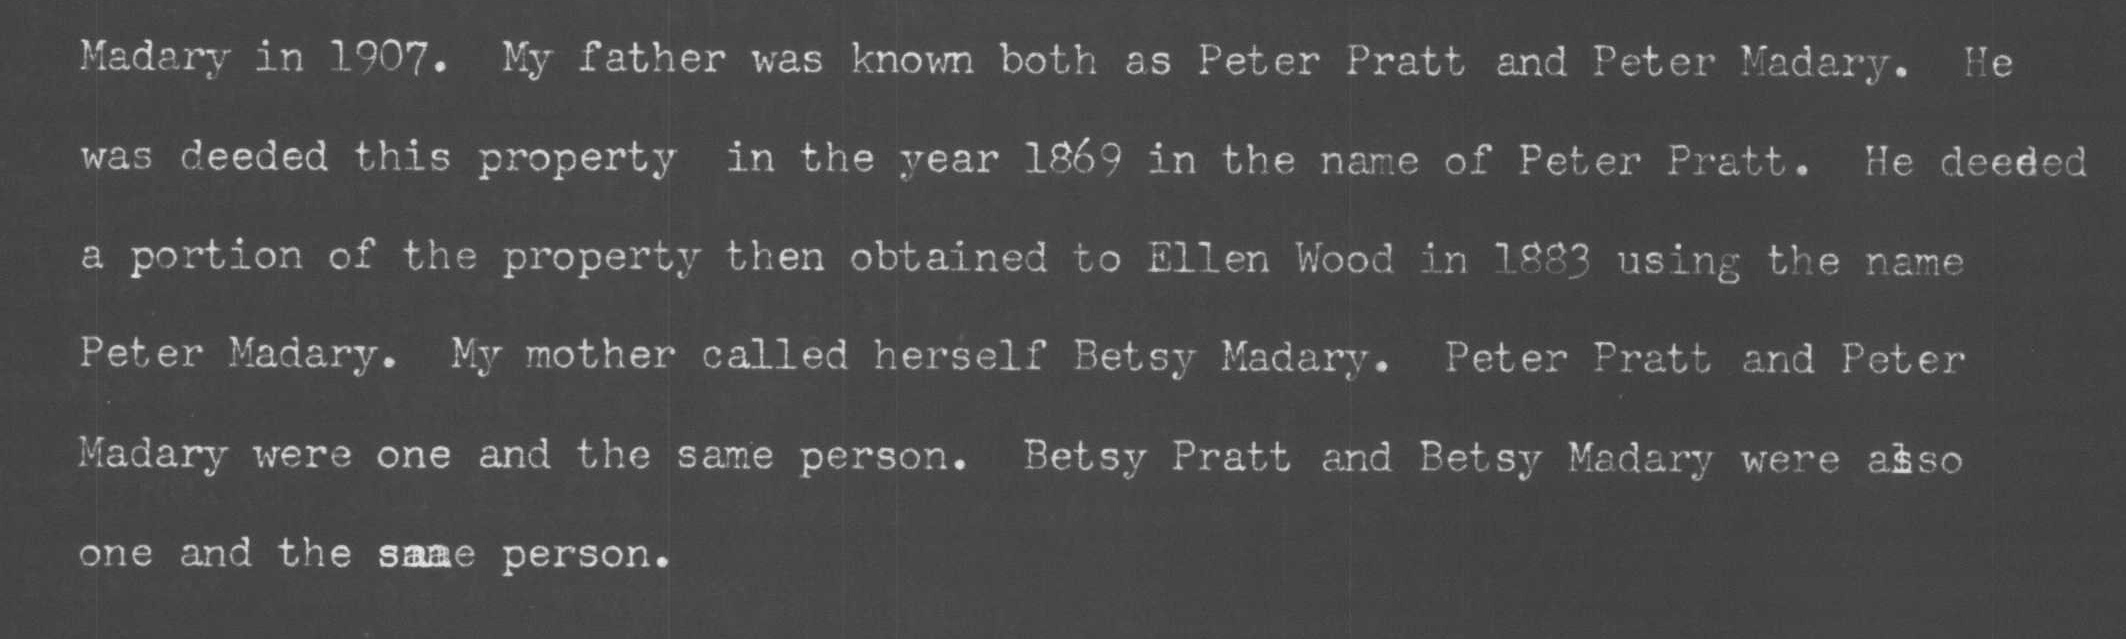 Sworn testimonial from Jordan Madary indicating that his father, Peter, went by two surnames and was deeded property.